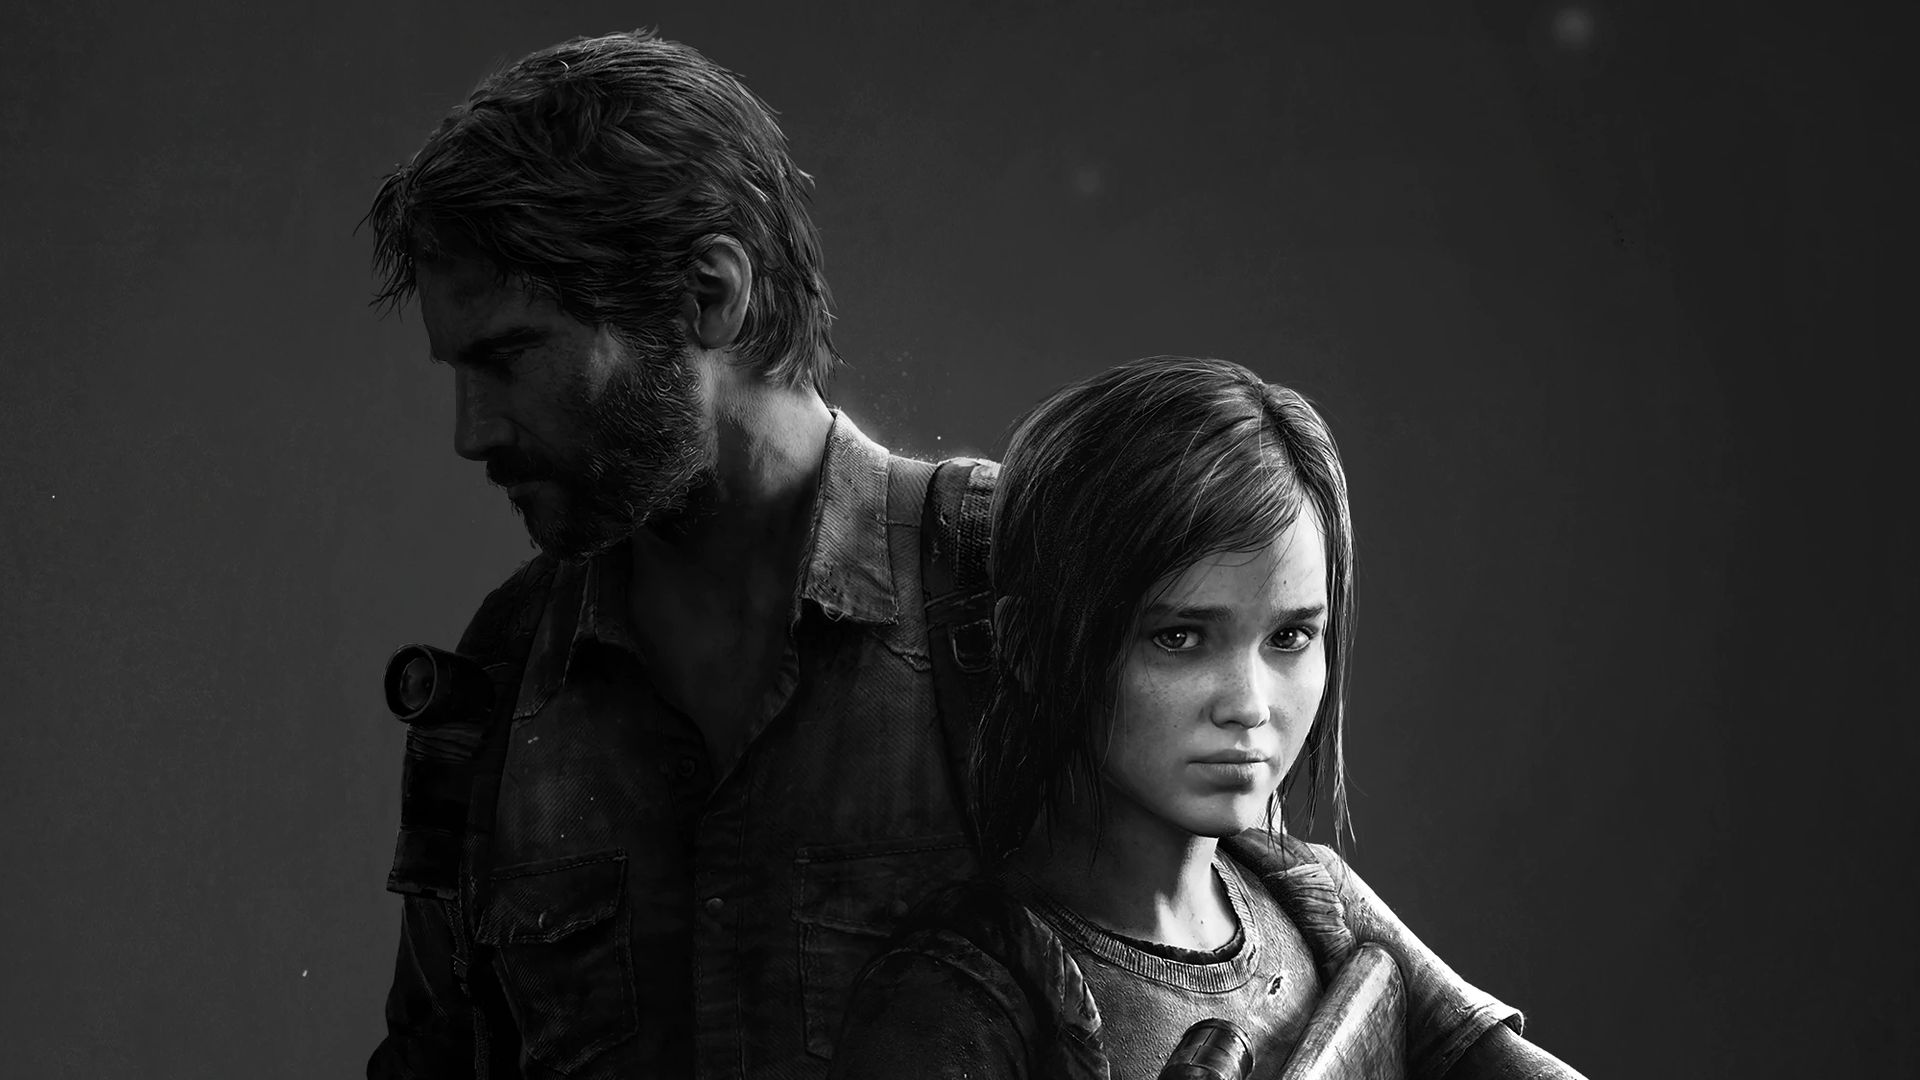 Ласт оф юс. The last of us. Джоэл the last of us.